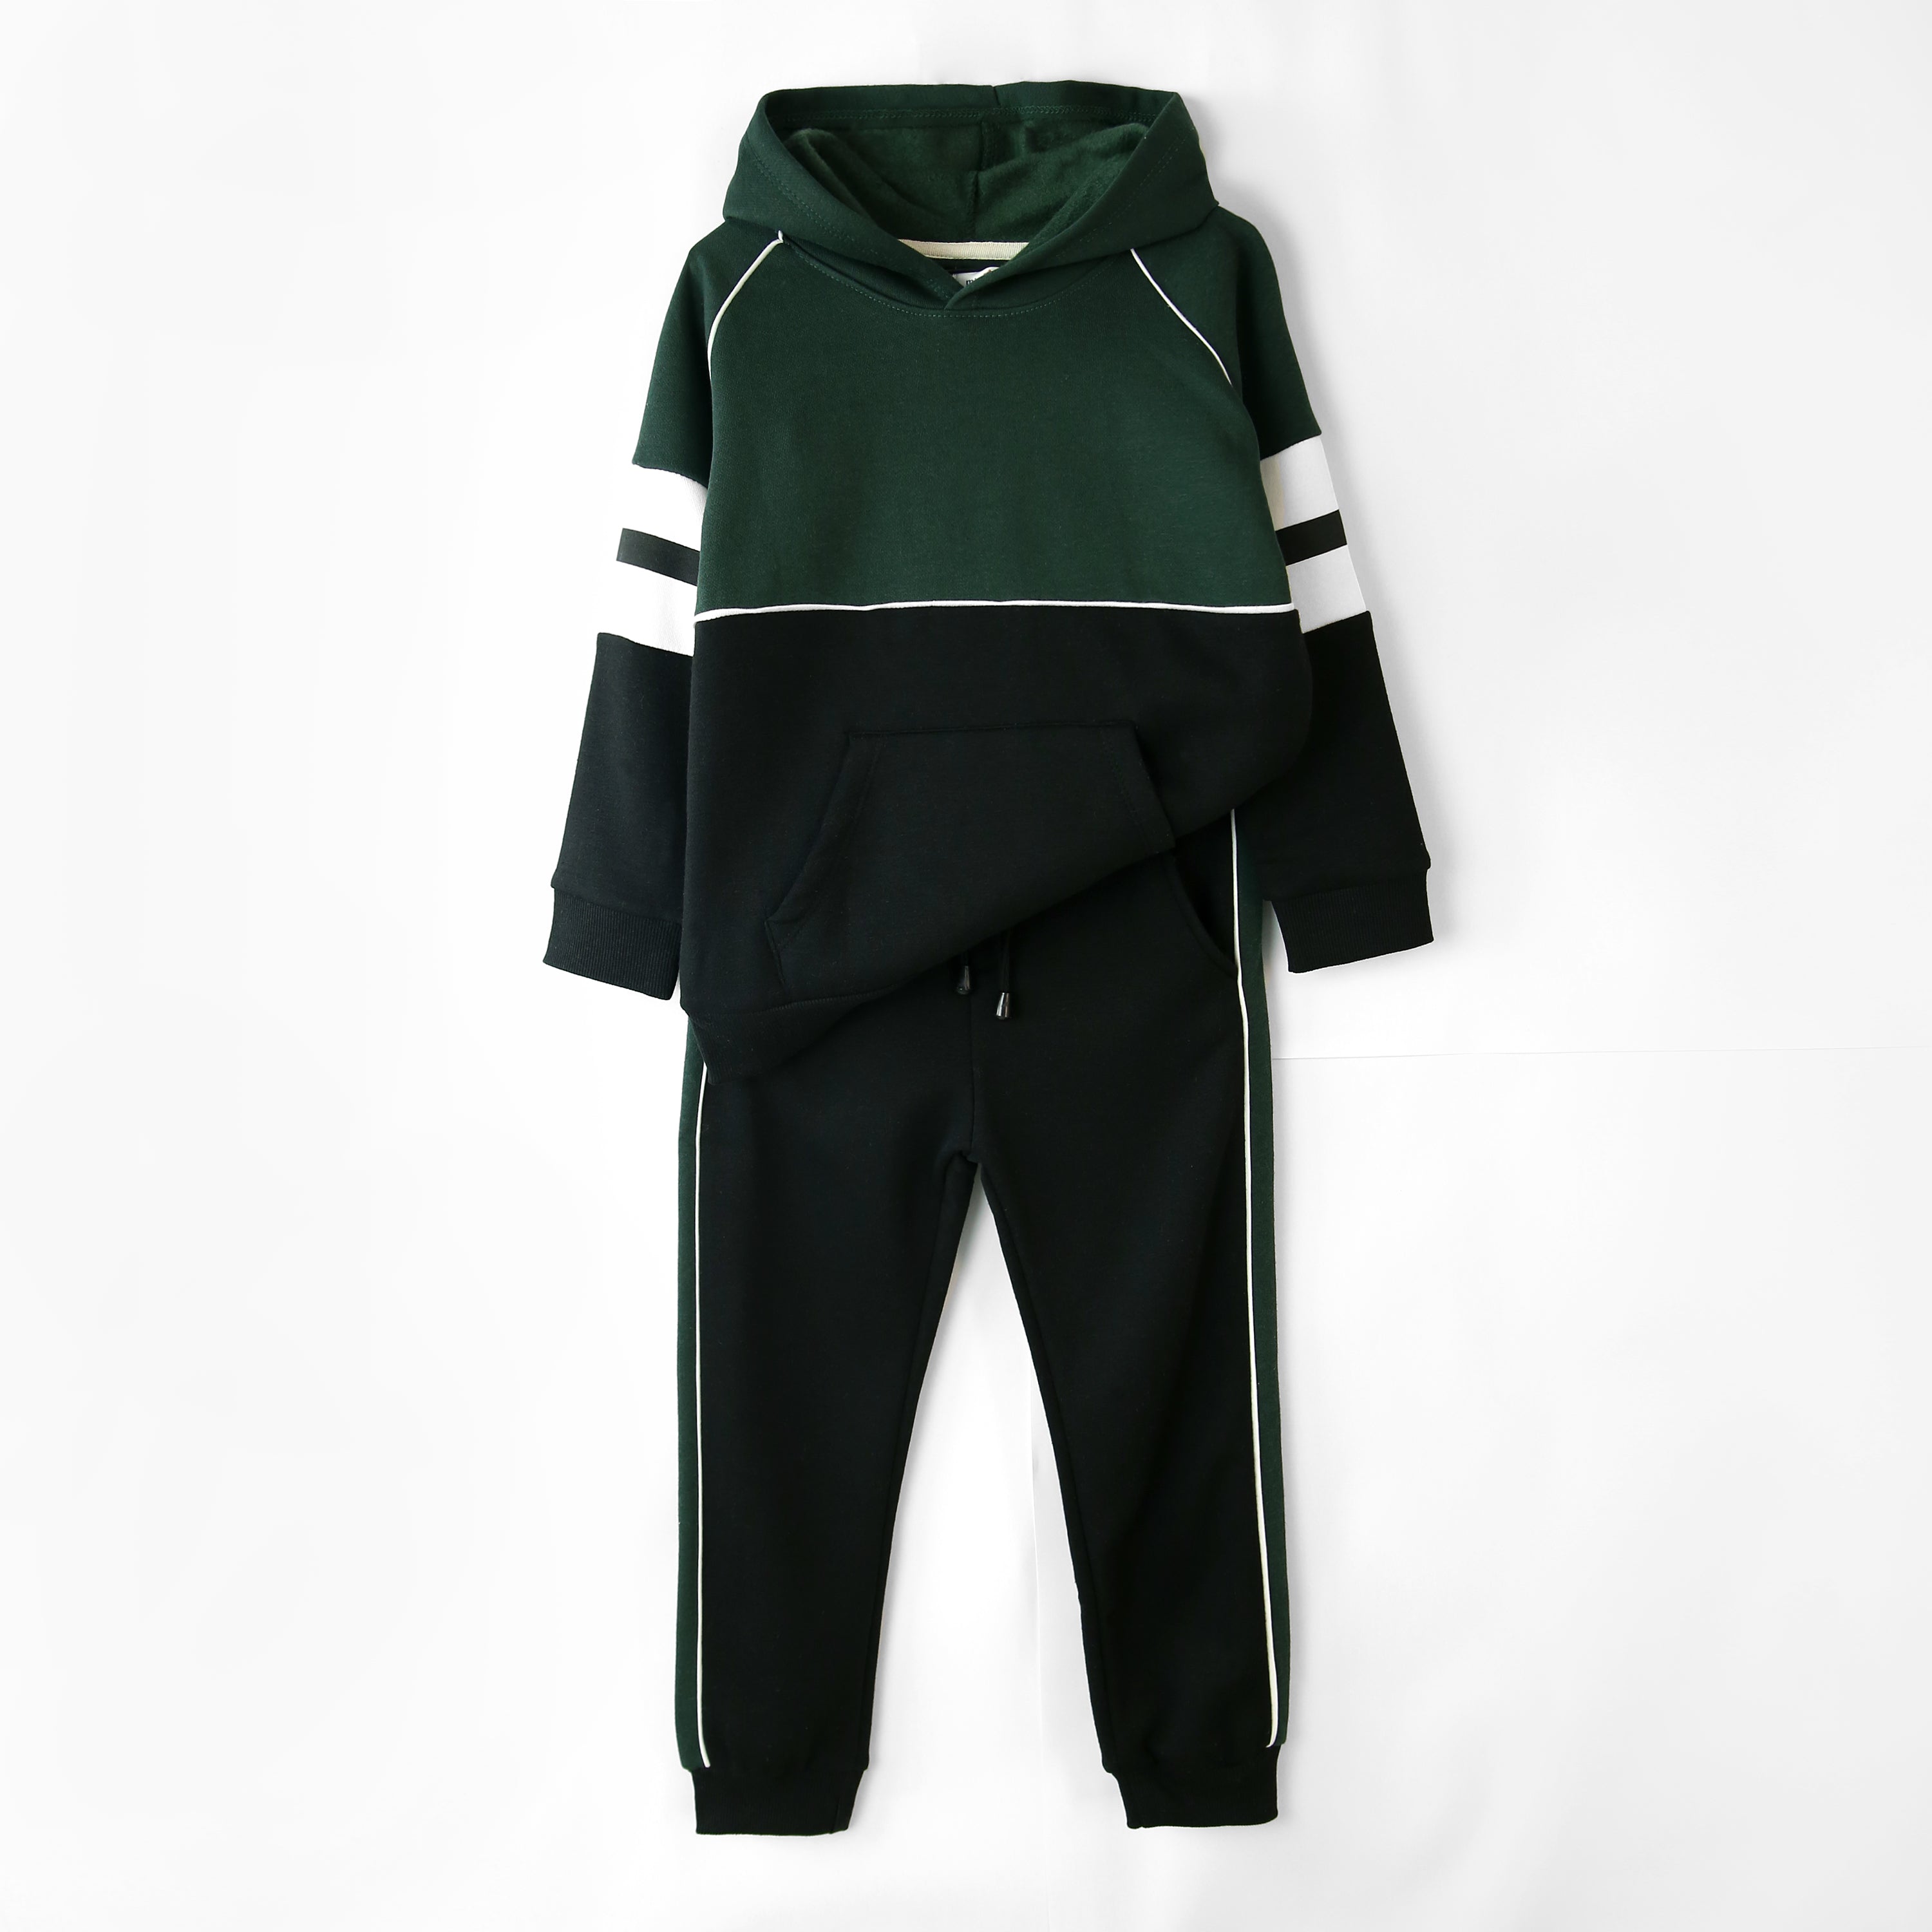 Premium Quality Cut & Sew Style Fleece Tracksuit For Kids